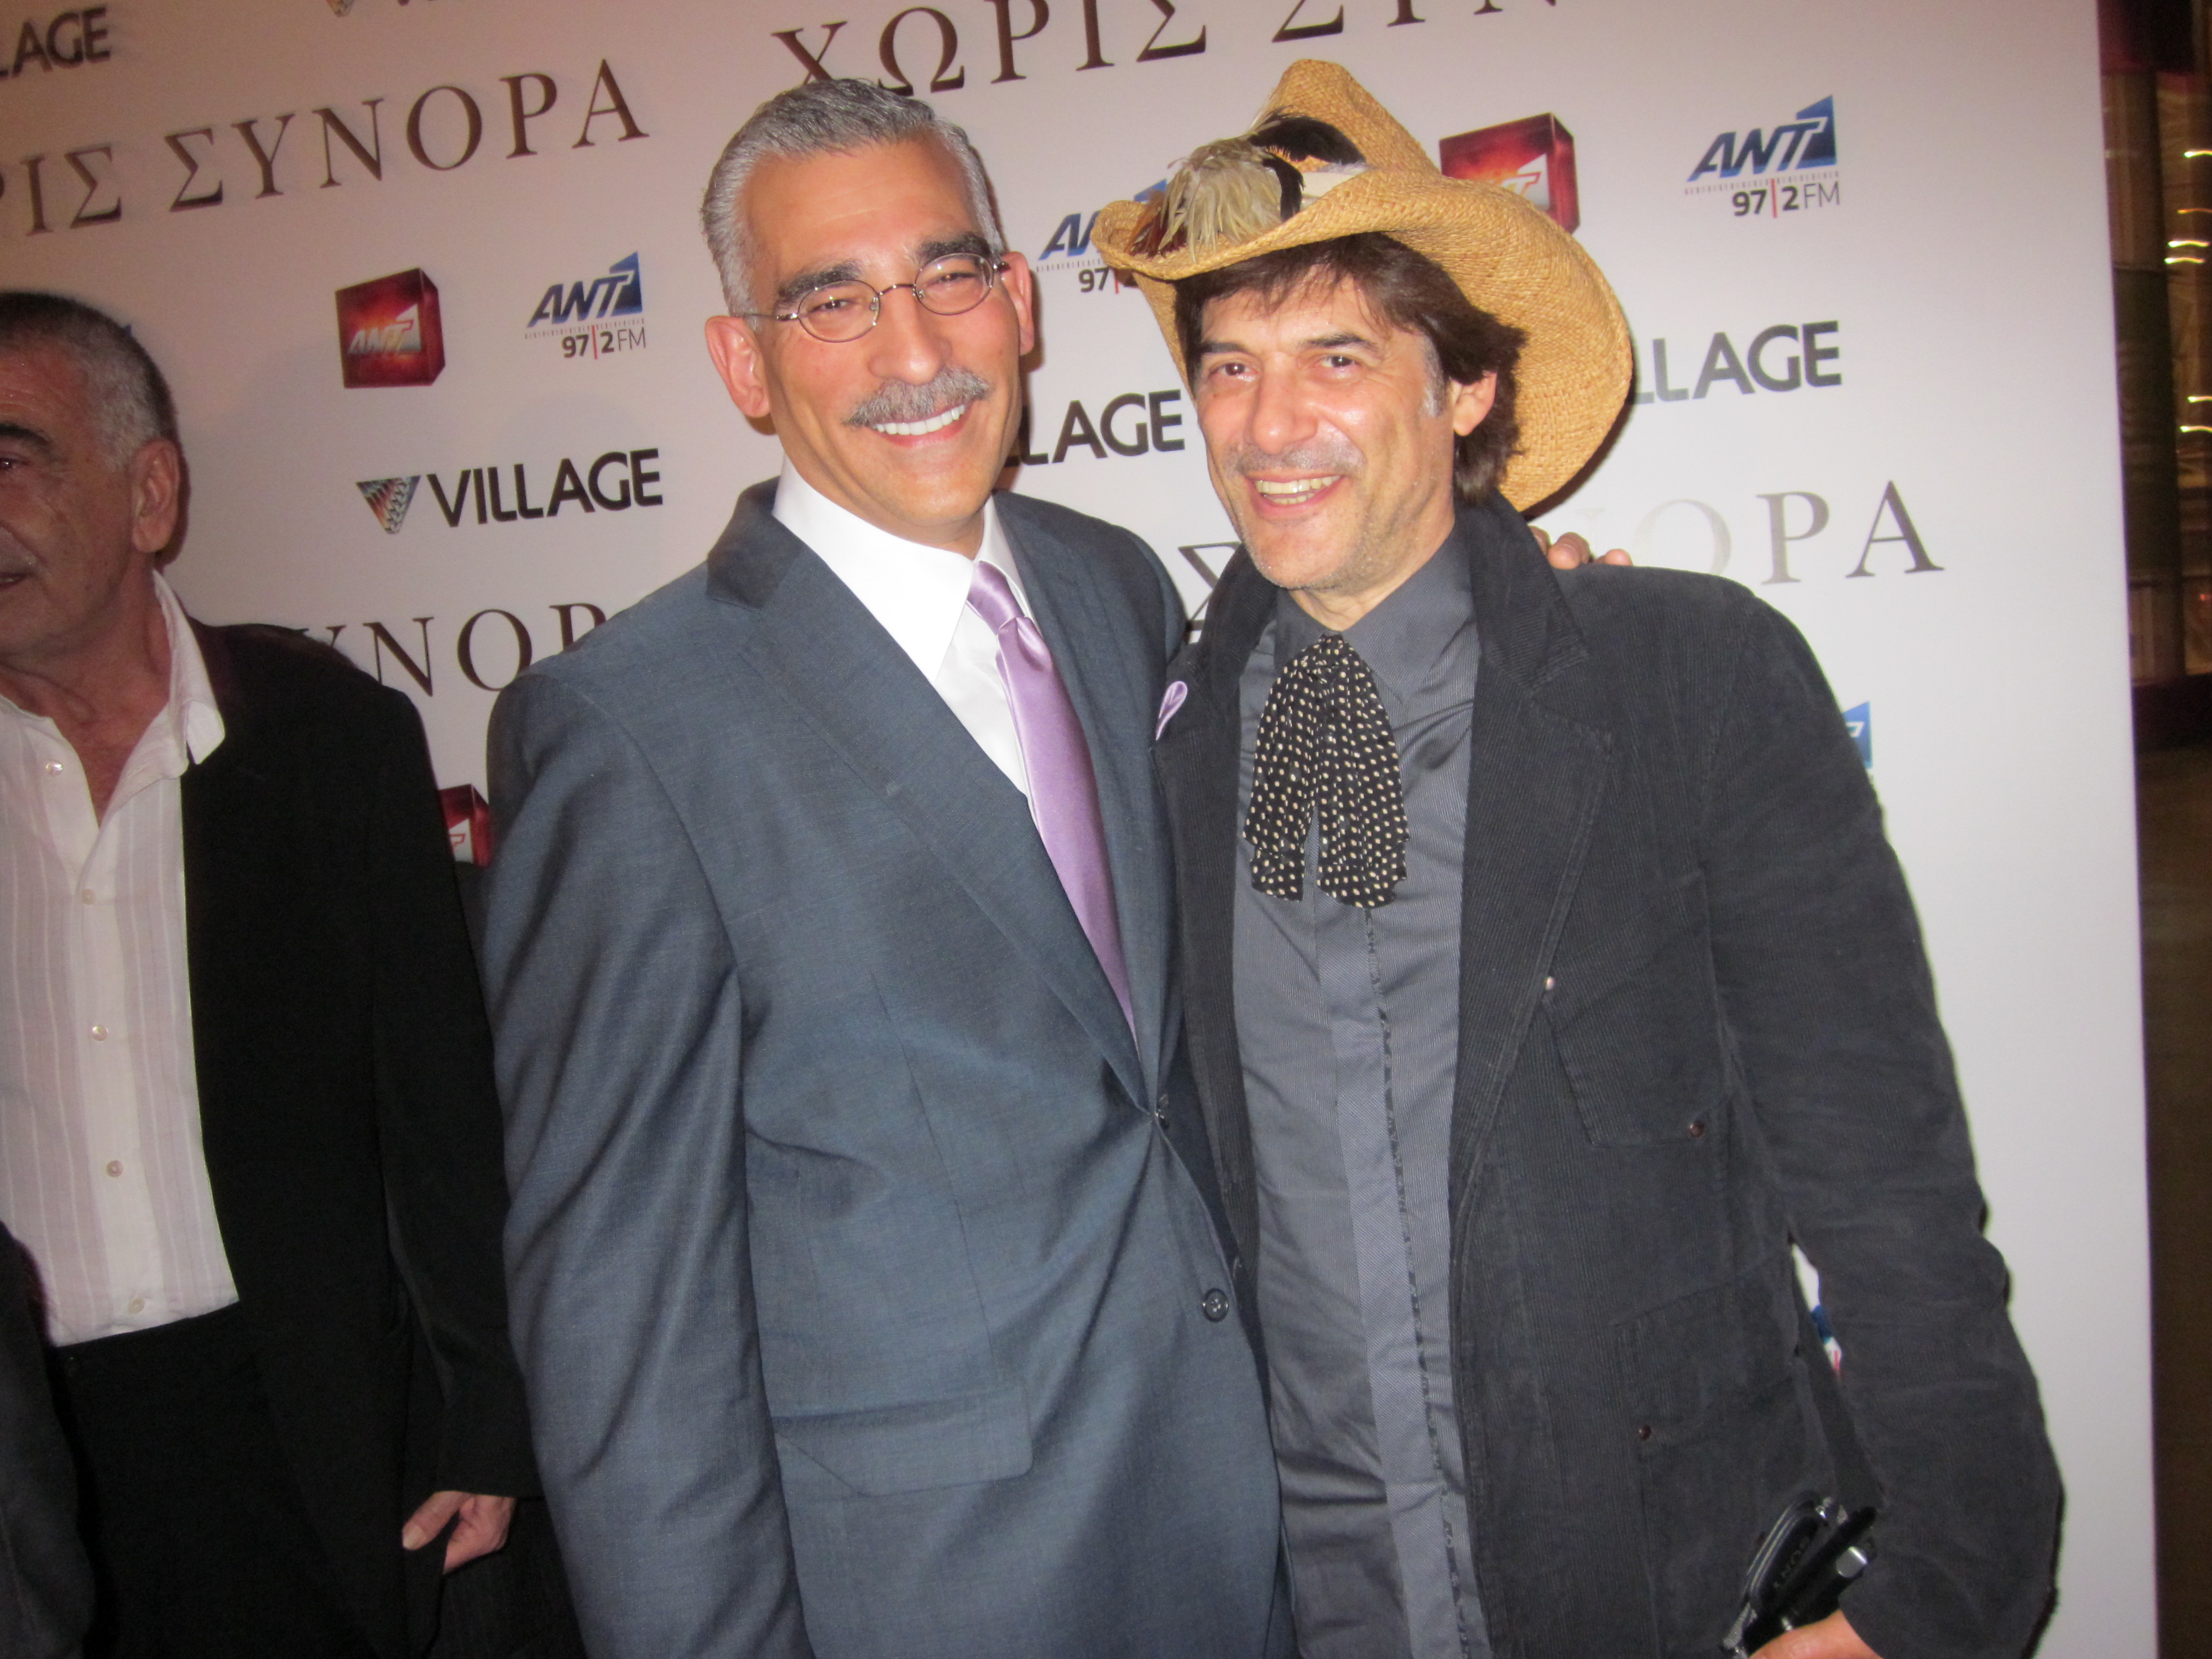 Paul Lillios and Georges Corraface October 18, 2010